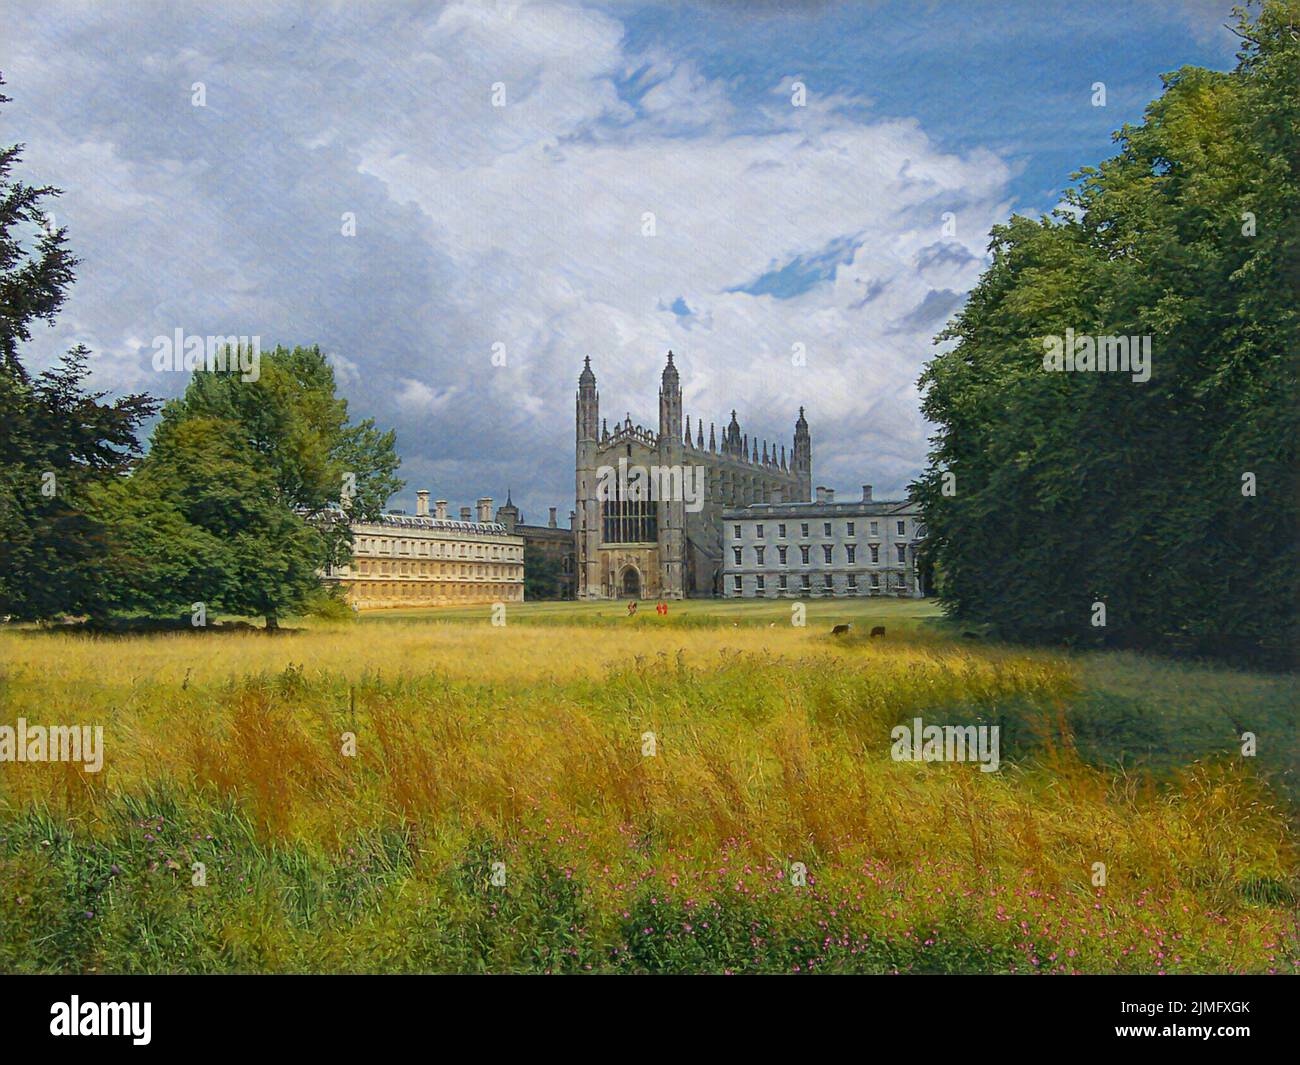 River Cam view of King's College Chapel in Cambridge, England. Edited to look like a painting, with fluffy clouds, green trees, and tall grass growing Stock Photo